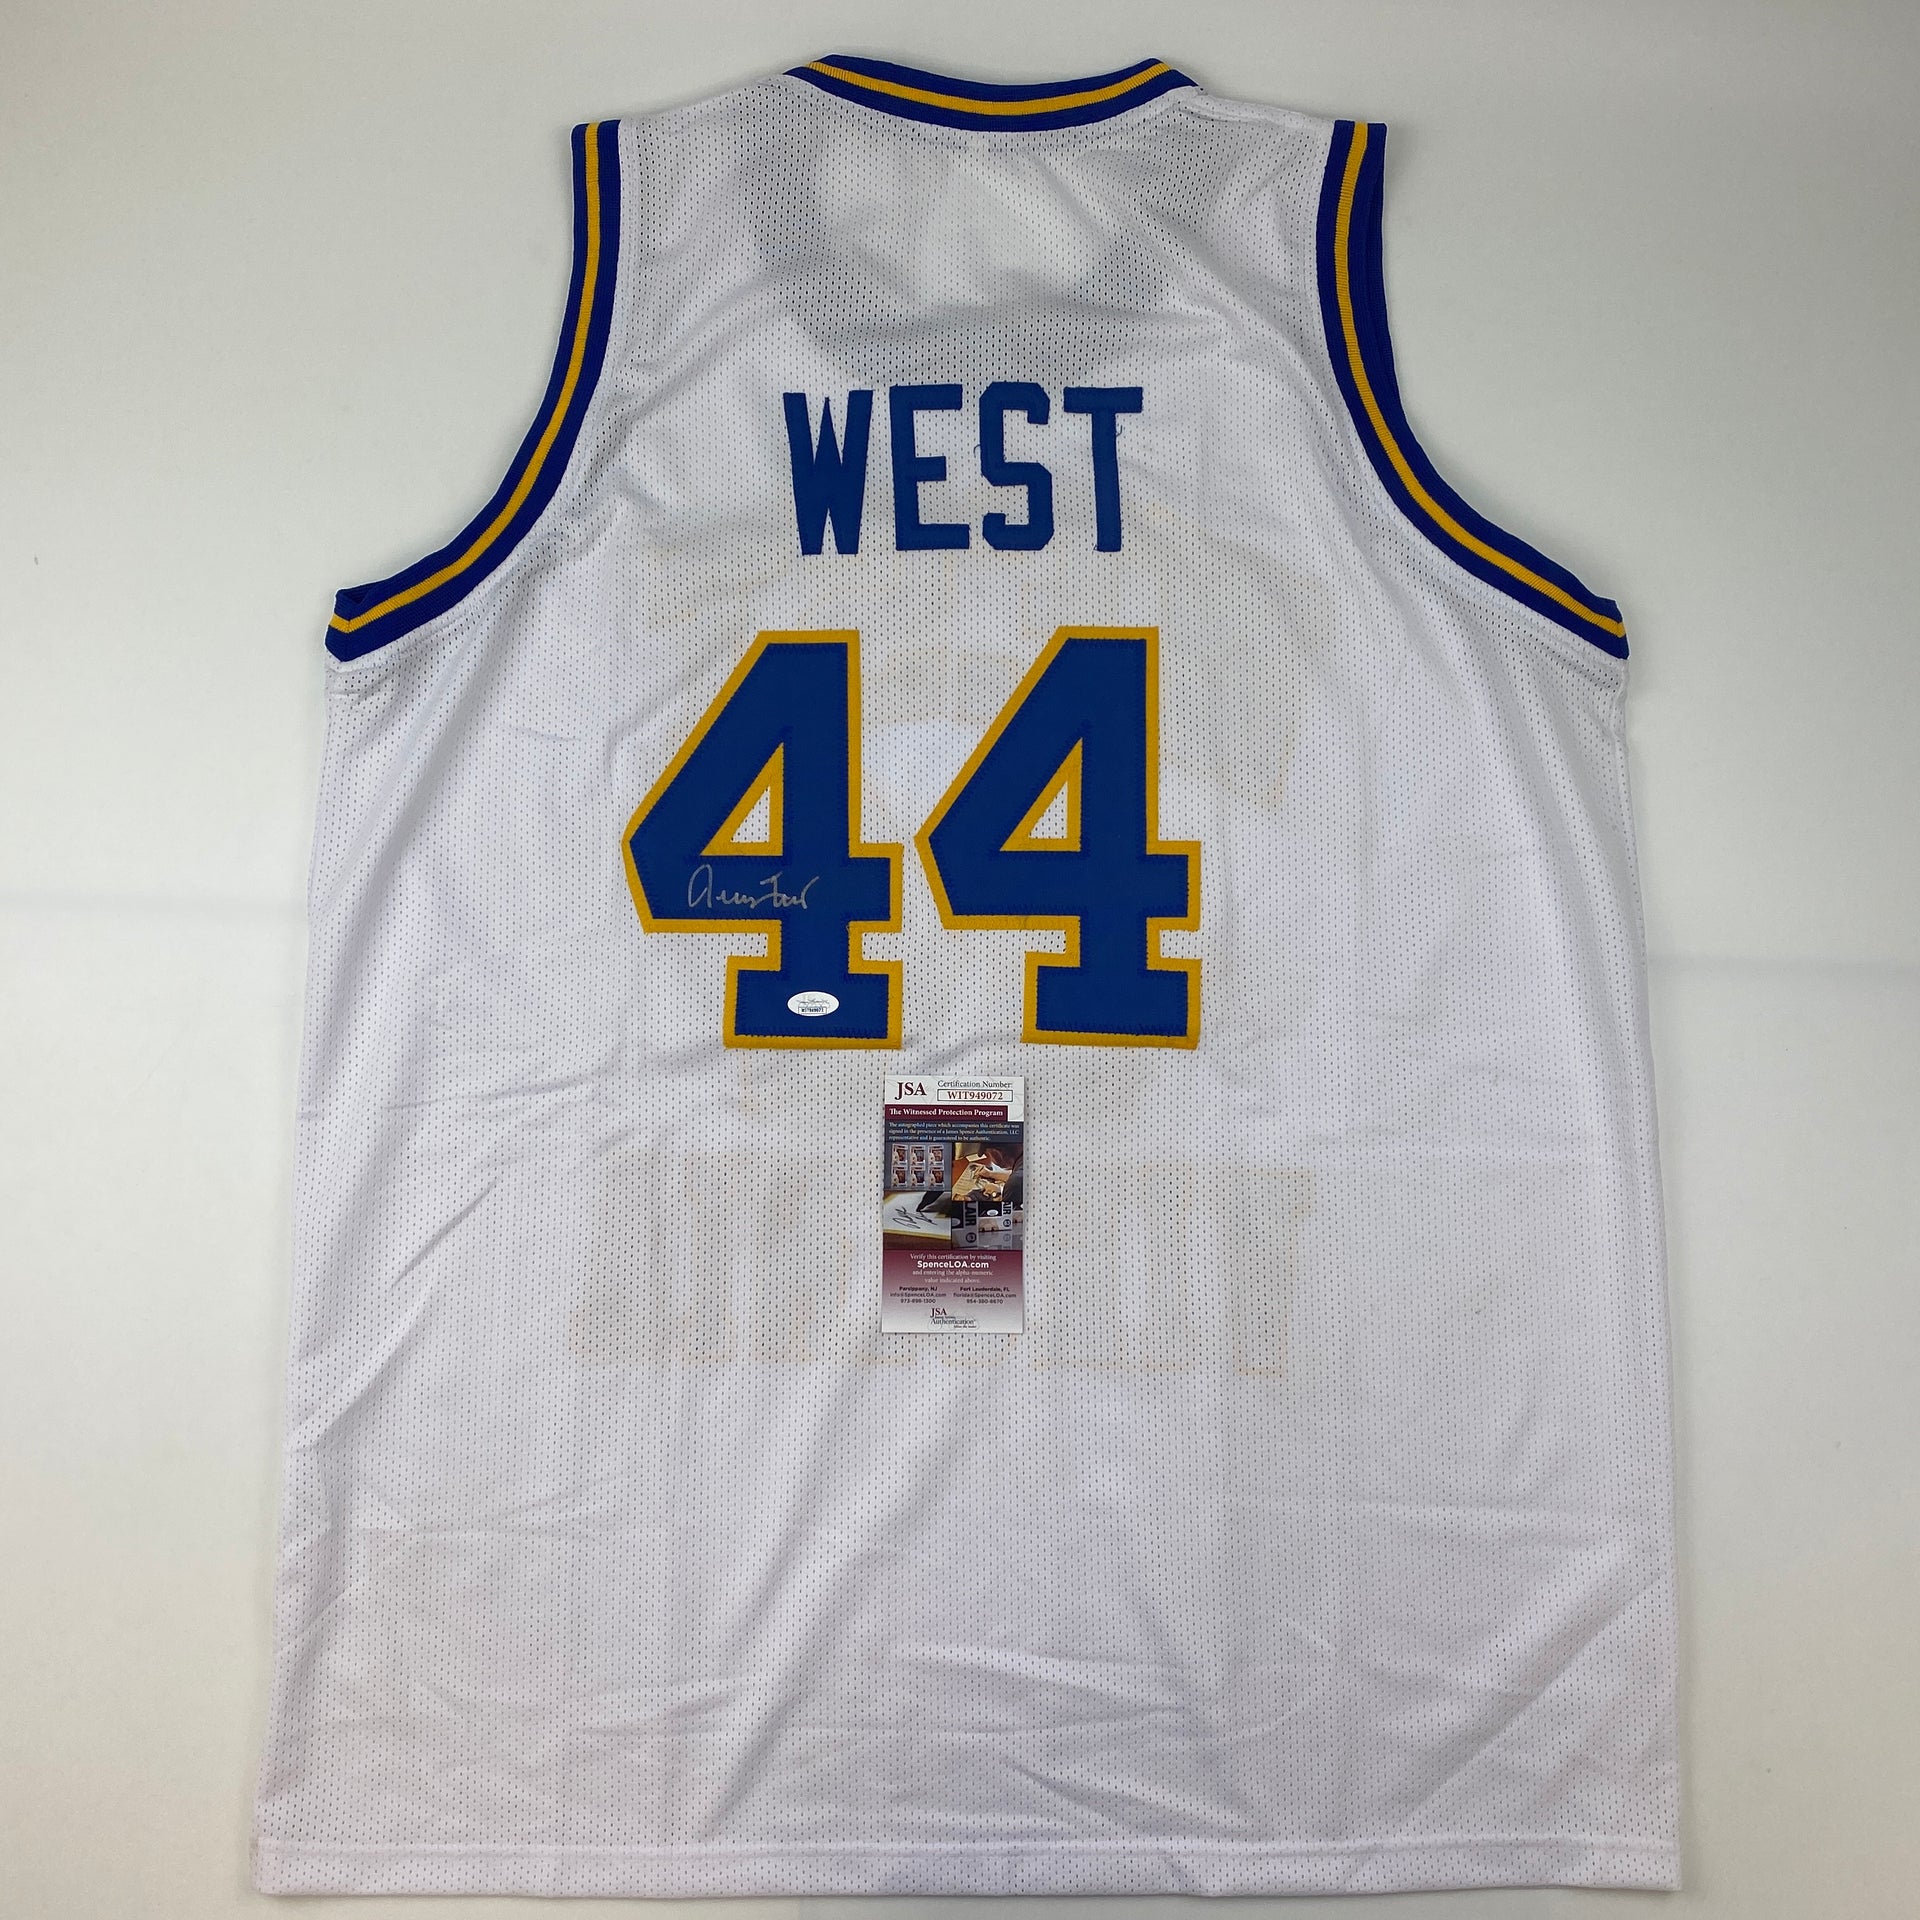 Jerry West Autographed Los Angeles Custom Jersey